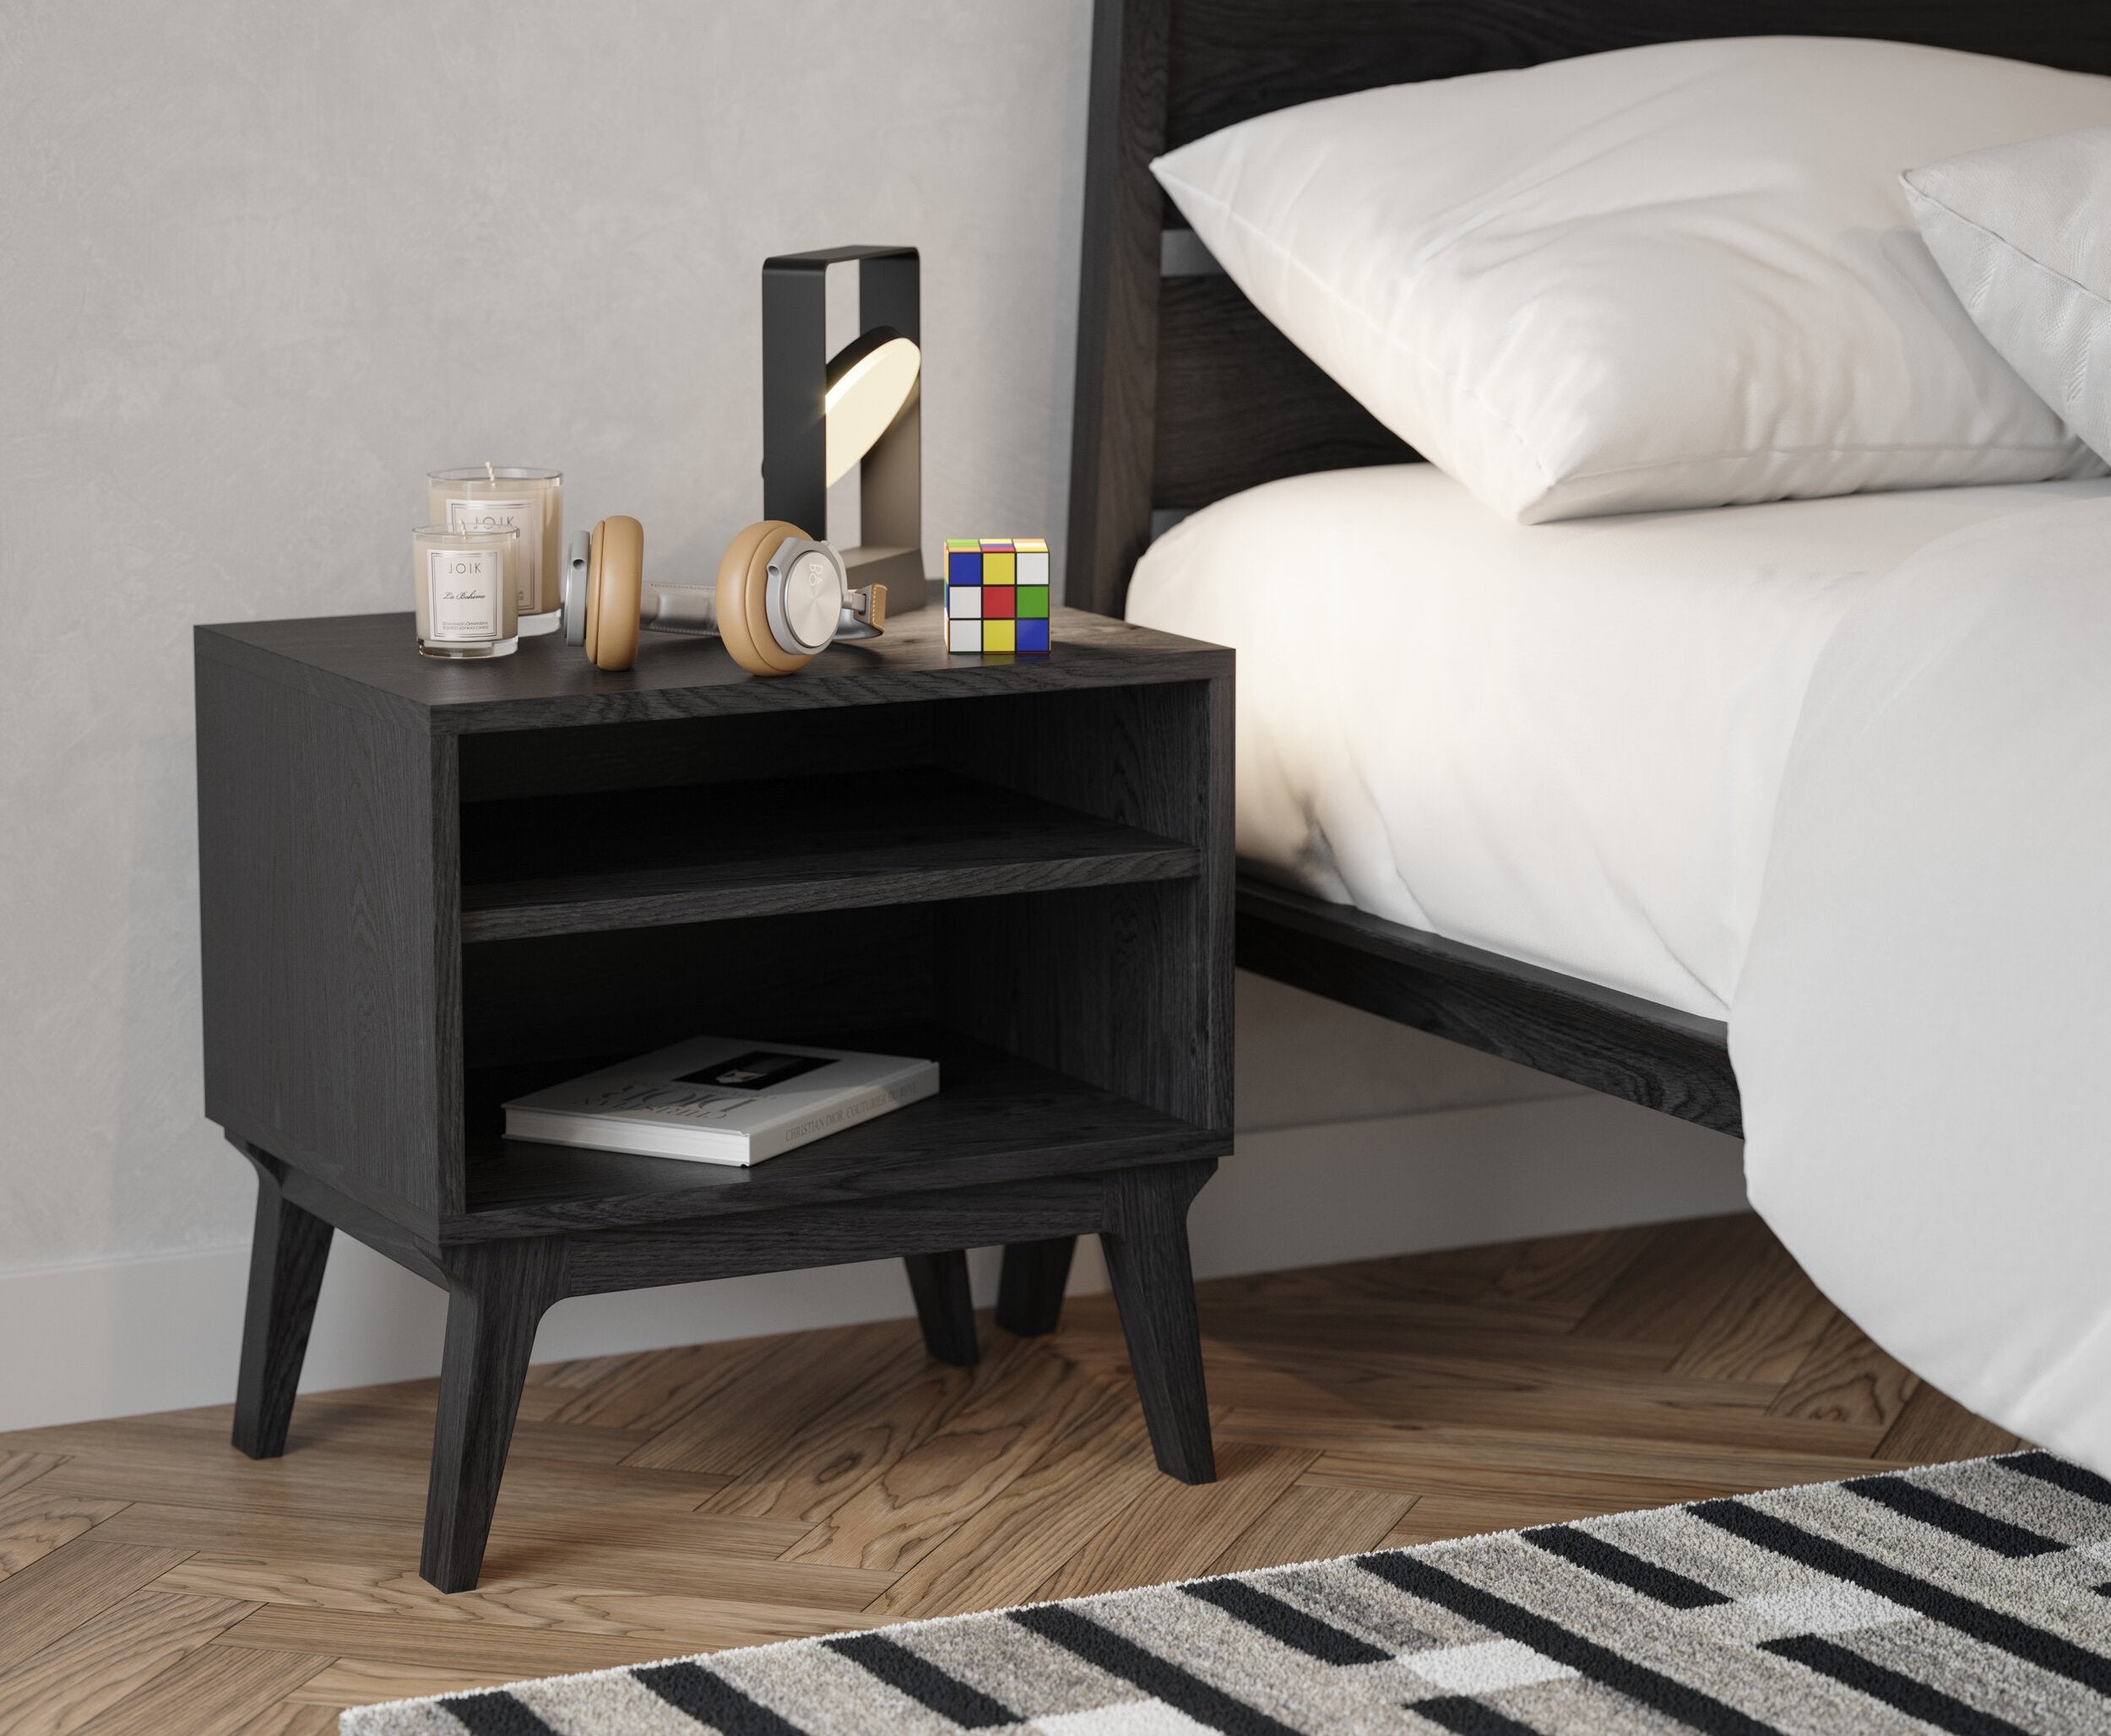 Modern Bedside Tables Built for Style and Comfort